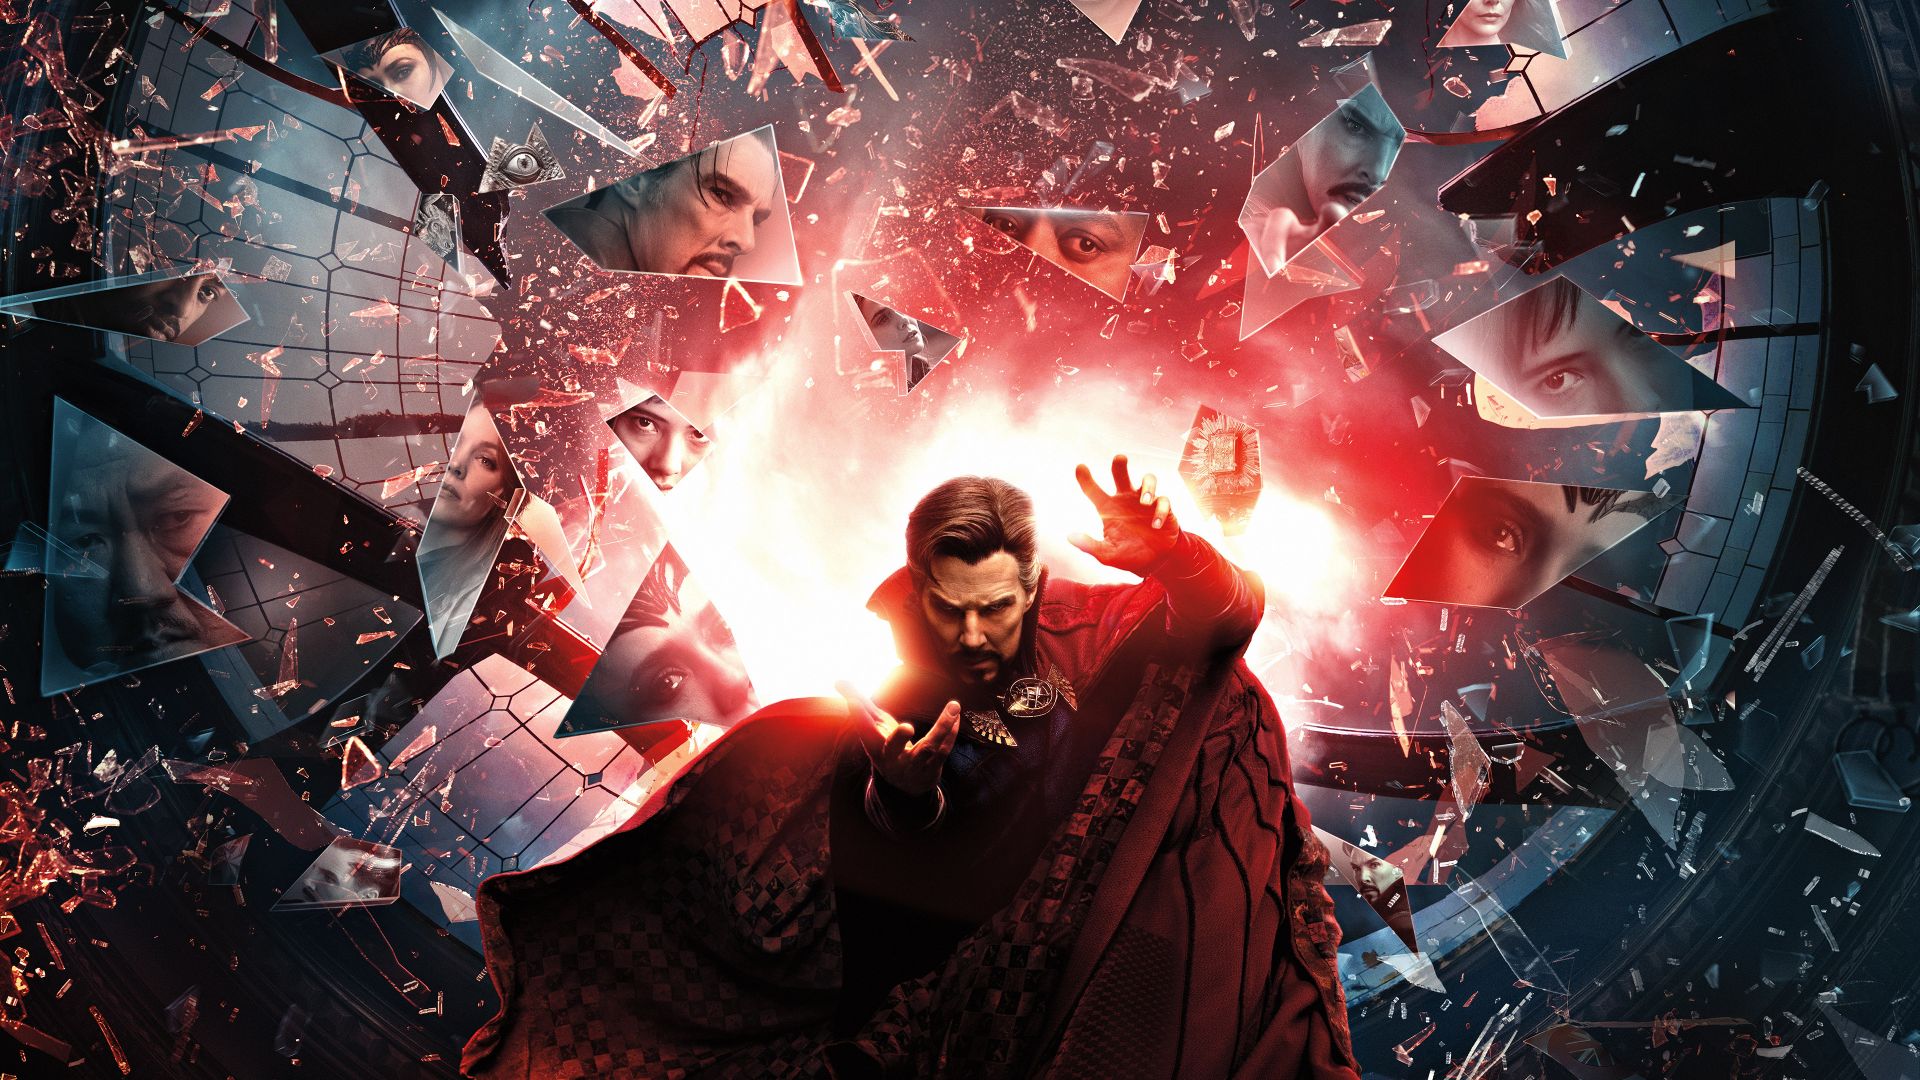 Doctor strange in the multiverse of madness, movie poster, 2022 wallpaper, hd image, picture, background, ee8132